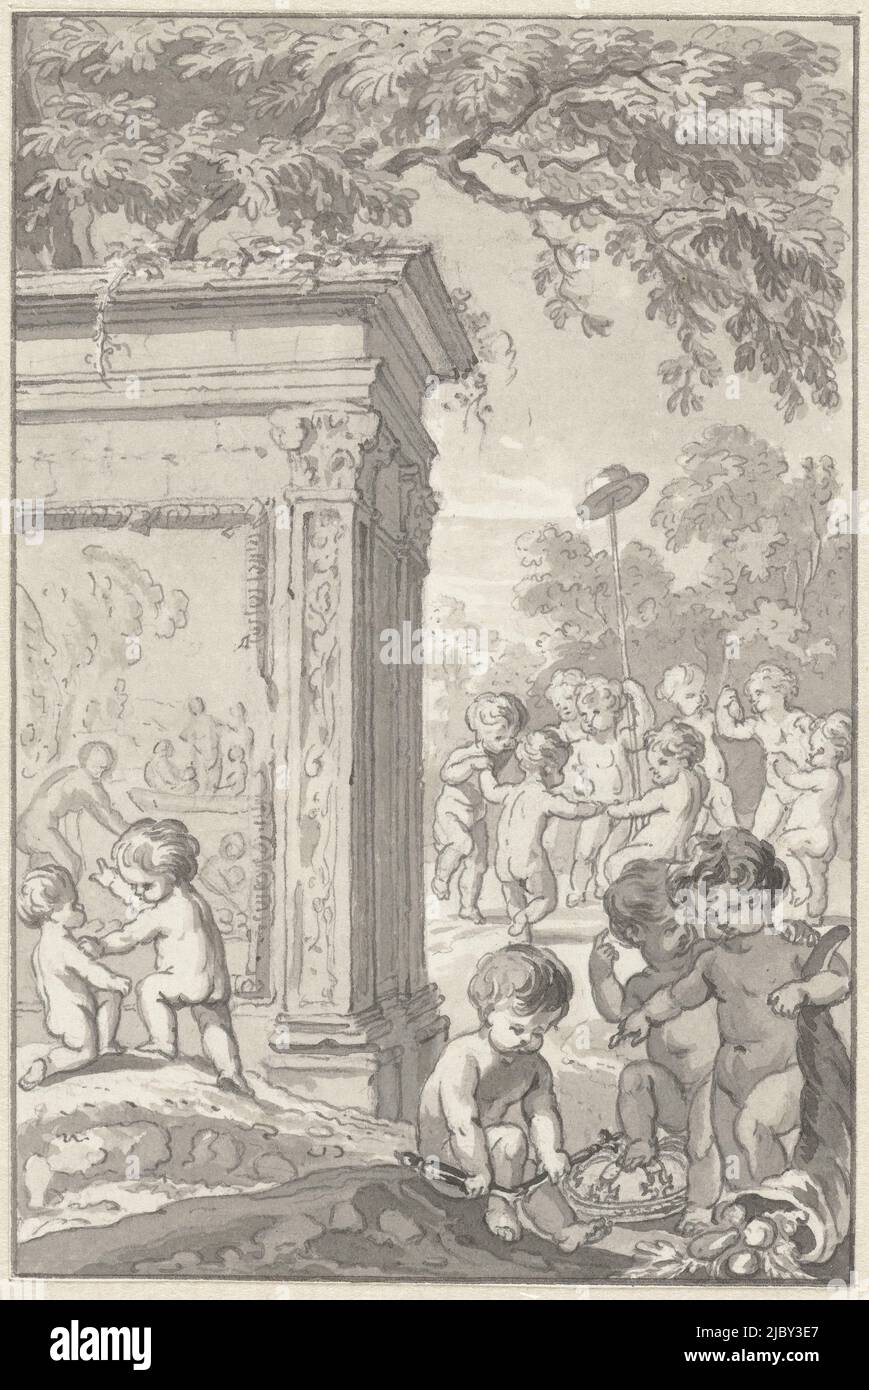 Design for title page for: Aloude Staat der Verenigde Nederlanden, Engelbertus Matthias Engelberts, 1782 - 1784, Design for title page for: Aloude Staat der Verenigde Nederlanden. Putti playing near a ruin and dancing around the liberty hat on a stick., draughtsman: Engelbertus Matthias Engelberts, 1782 - 1784, paper, pen, brush, h 136 mm × w 91 mm Stock Photo